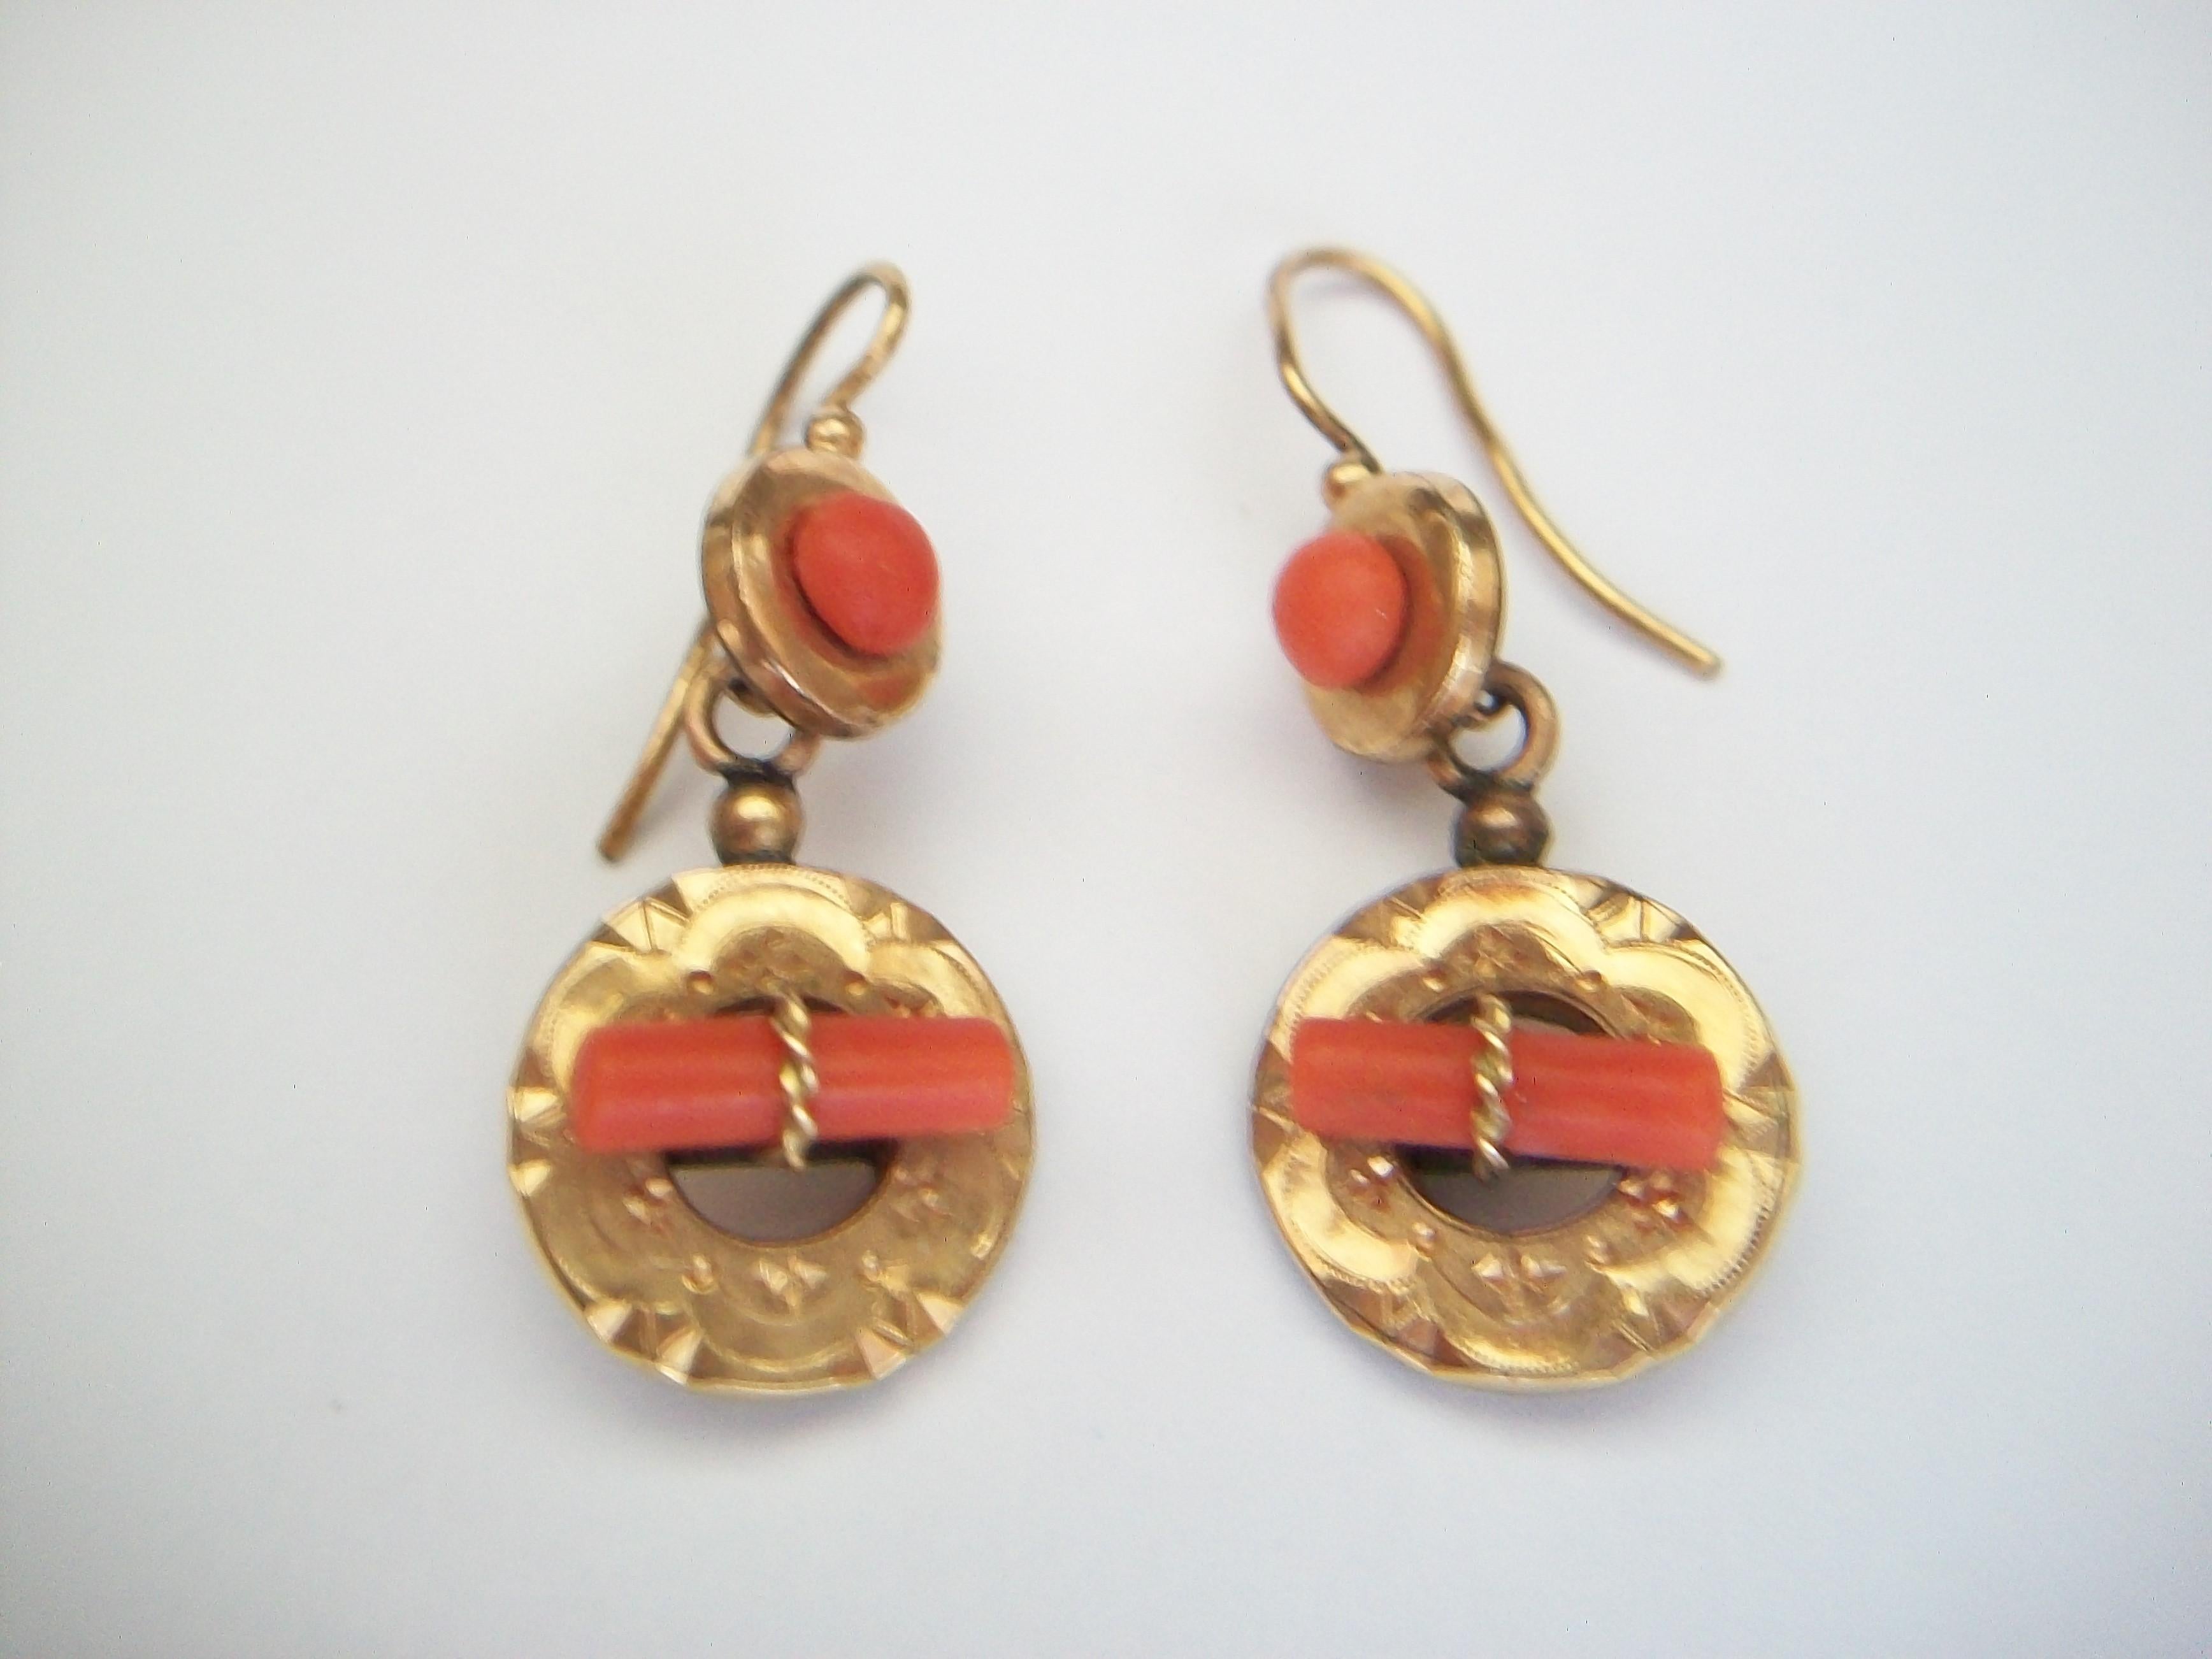 Rough Cut Etruscan Revival Gold Filled Tooled Dangle Earrings with Coral - Circa 1880